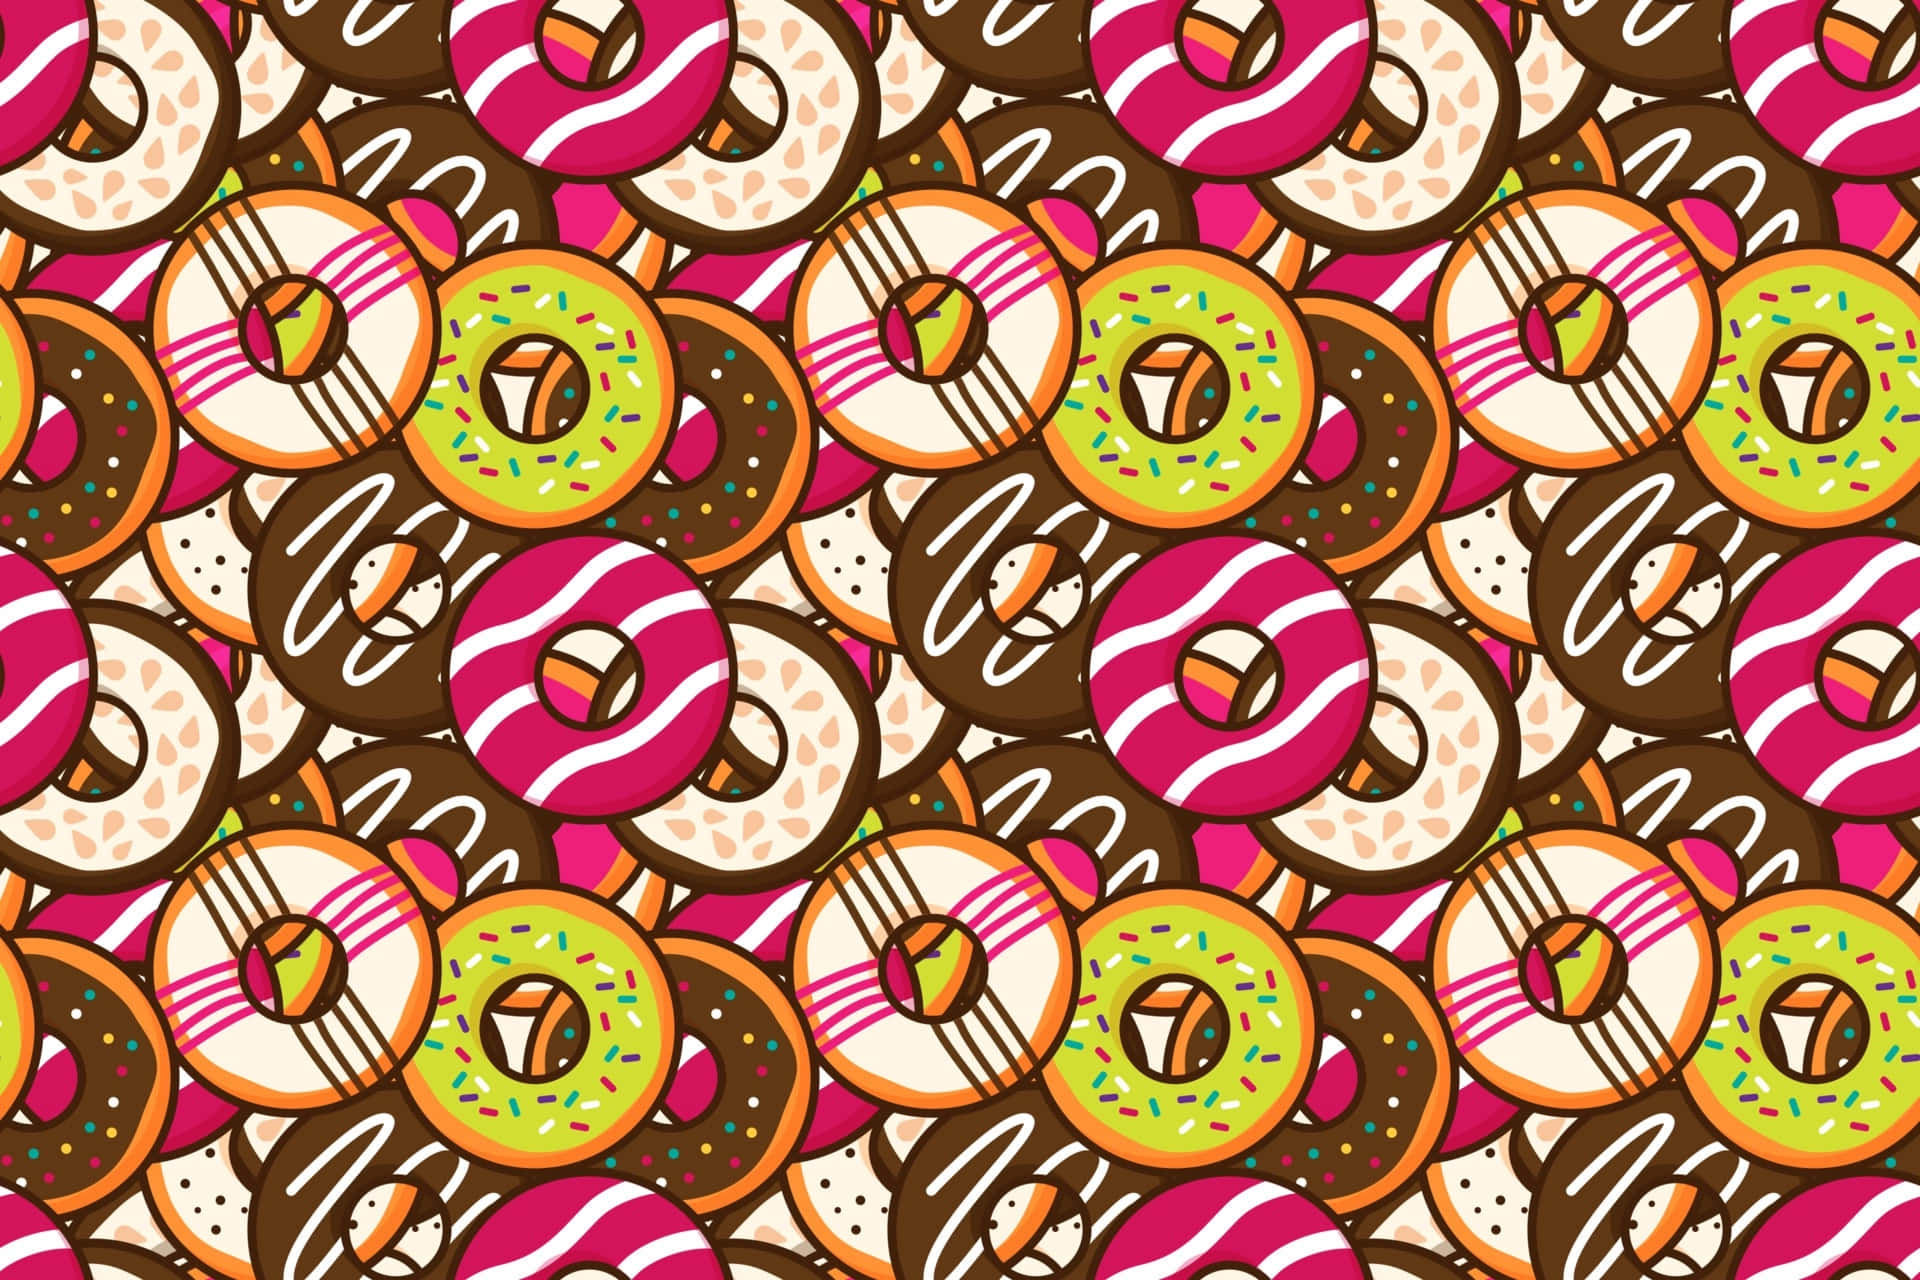 Deliciously Cute Donut with Sprinkles Wallpaper